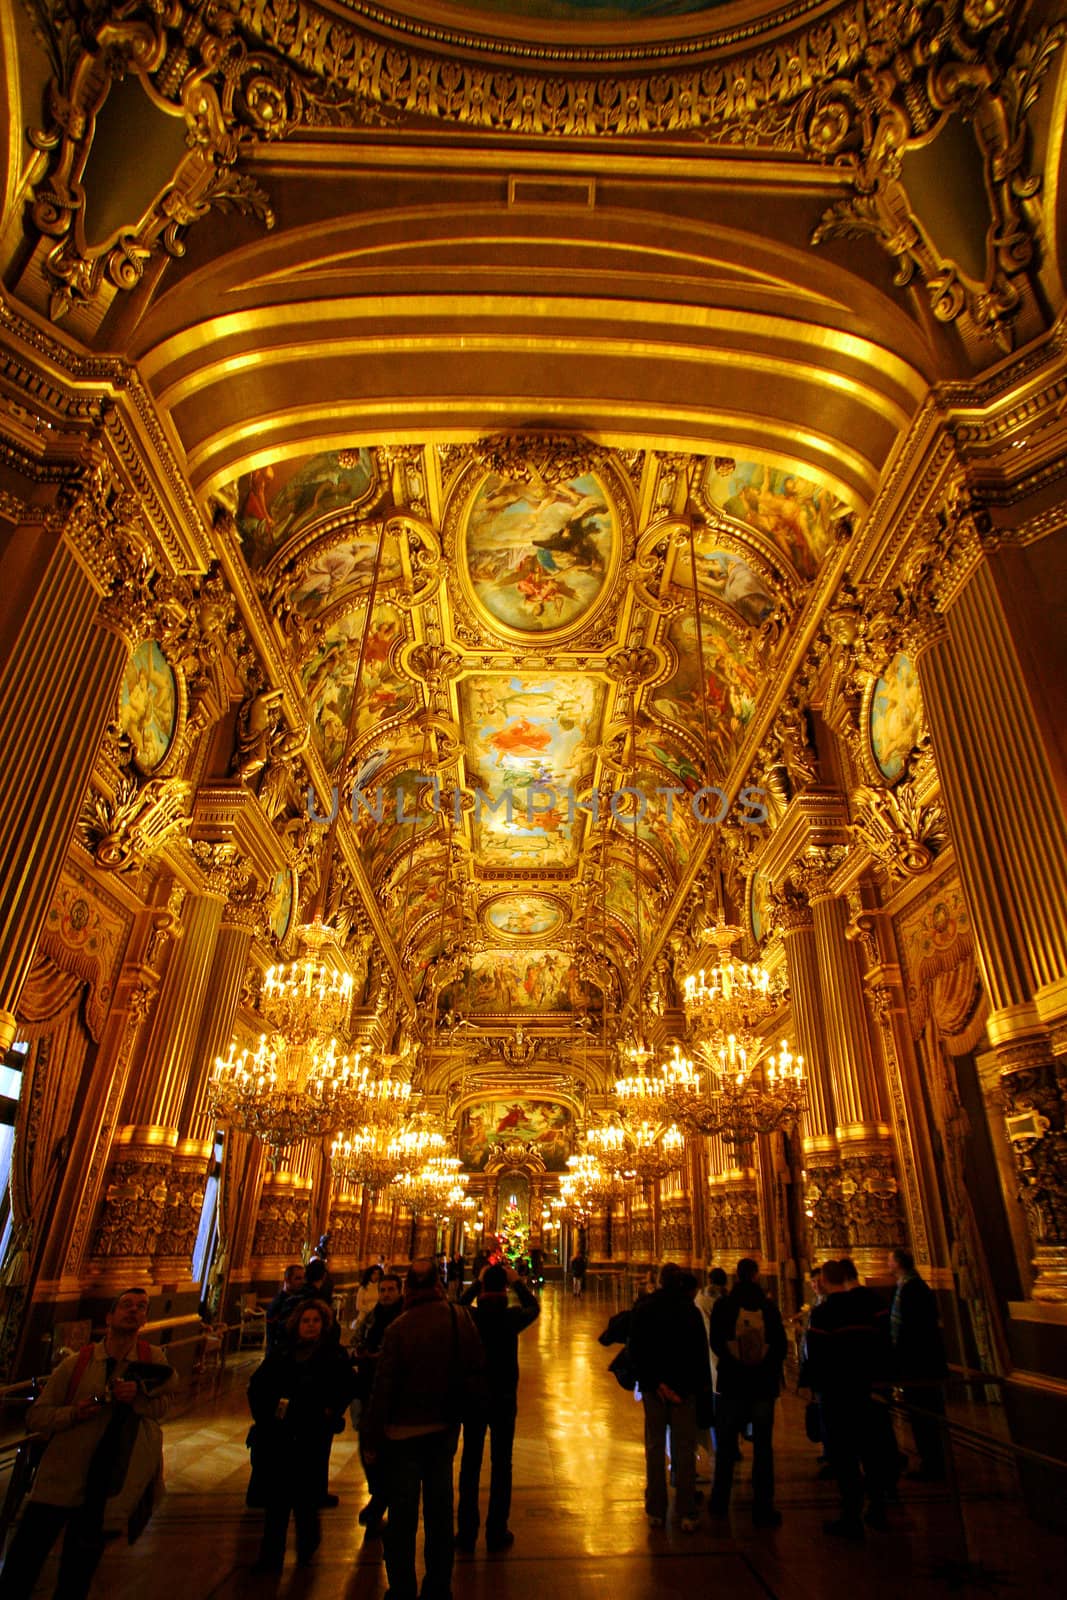 Palais or Opera Garnier & The National Academy of Music in Paris, France